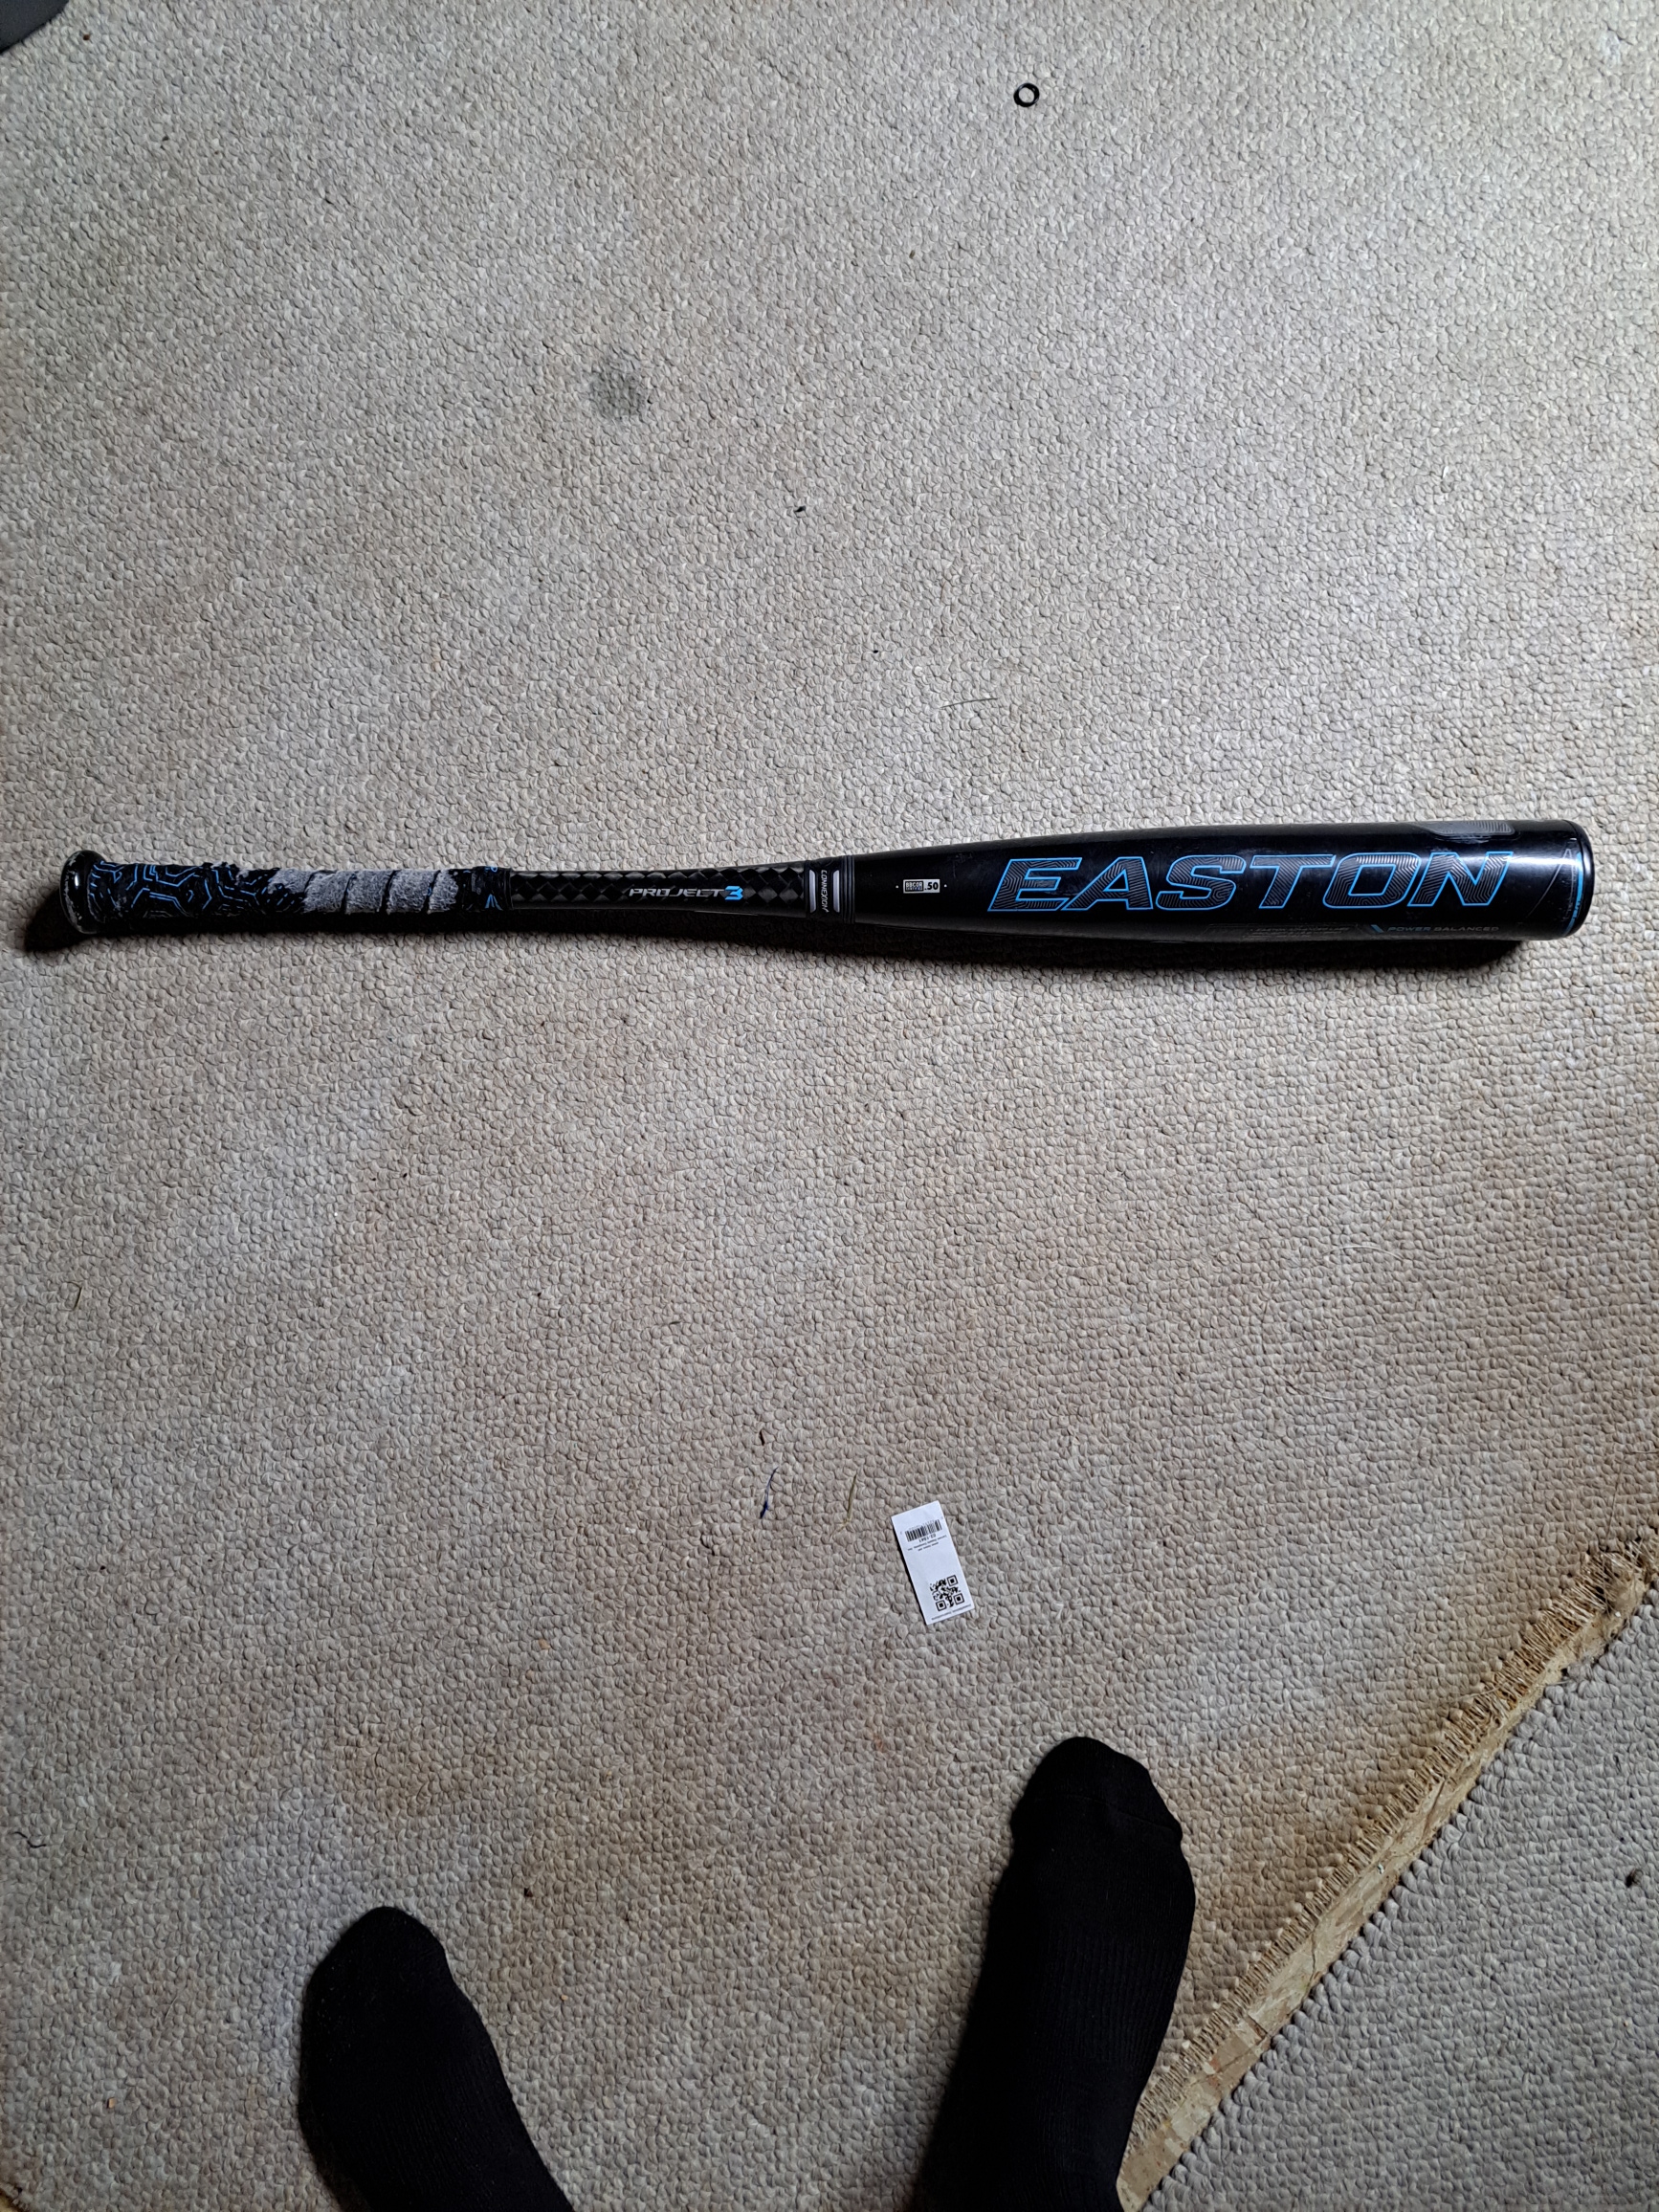 Used BBCOR Certified Easton Hybrid Project 3 13.6 Bat (-3) 30 oz 33"